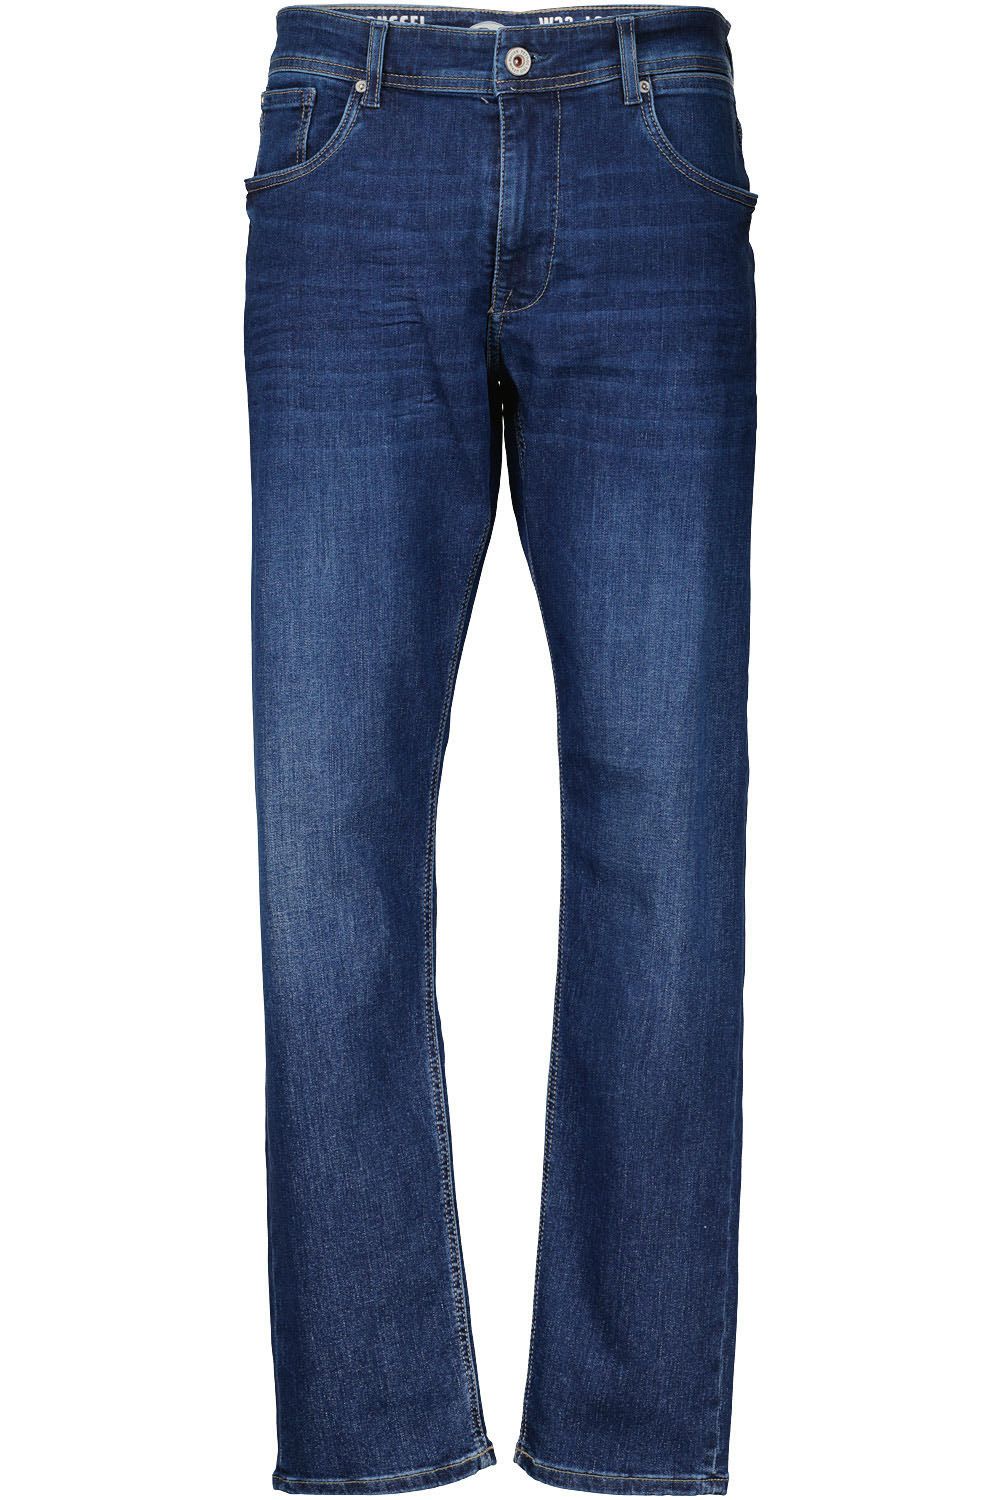 Petrol Jeans Russel Tapered Blauw